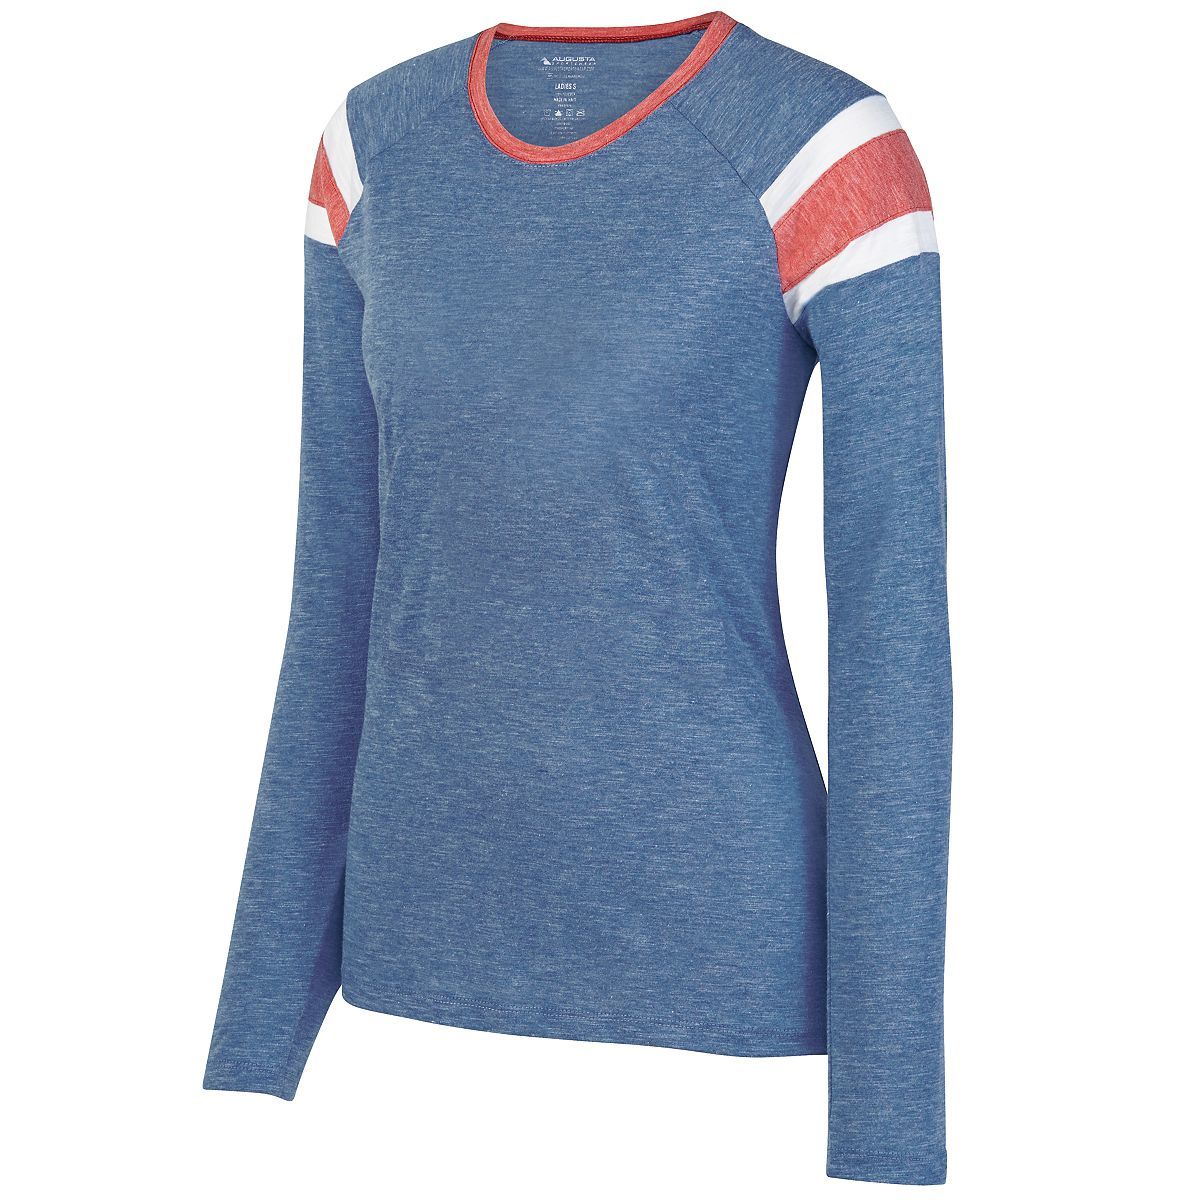 Augusta Sportswear Ladies Long Sleeve Fanatic Tee in Royal/Red/White  -Part of the Ladies, Ladies-Tee-Shirt, T-Shirts, Augusta-Products, Shirts product lines at KanaleyCreations.com